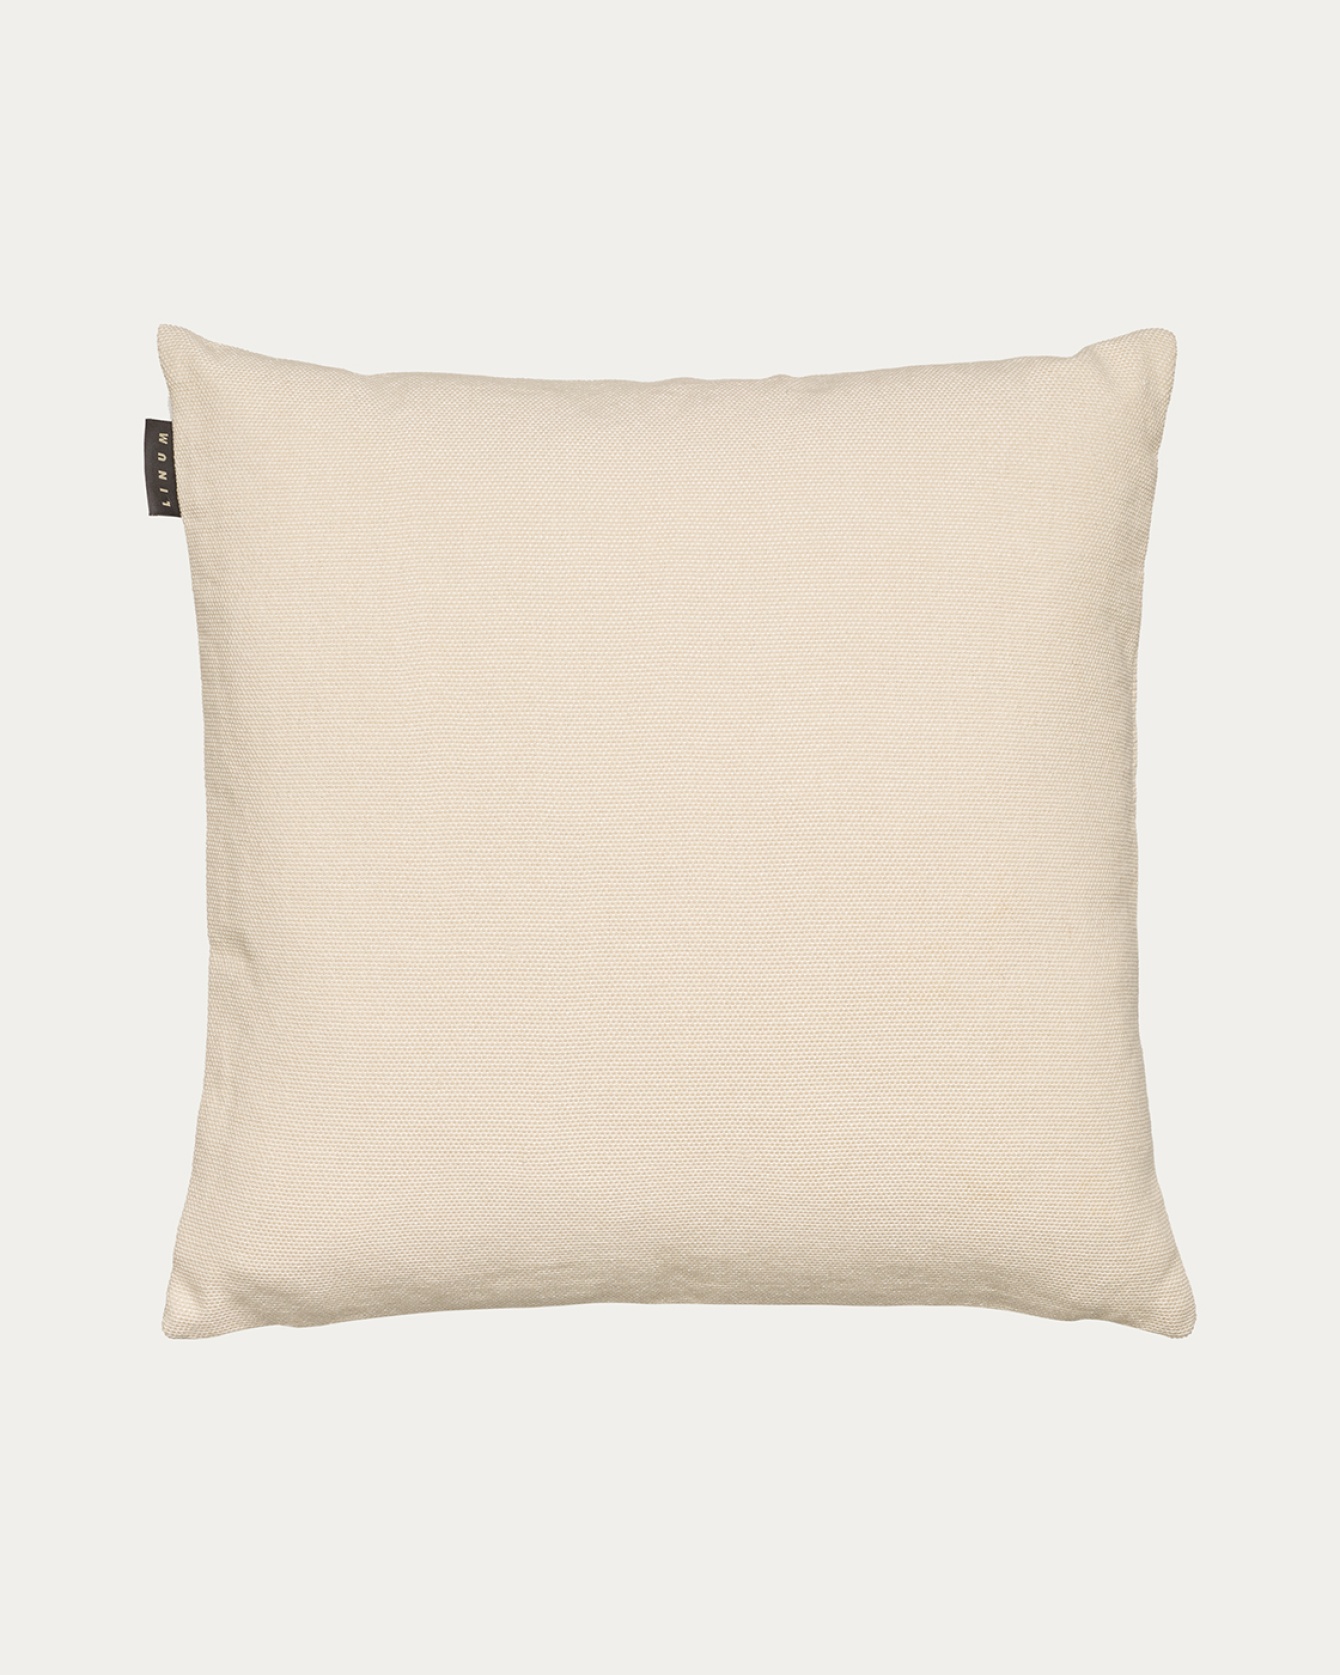 Product image creamy beige PEPPER cushion cover made of soft cotton from LINUM DESIGN. Easy to wash and durable for generations. Size 50x50 cm.